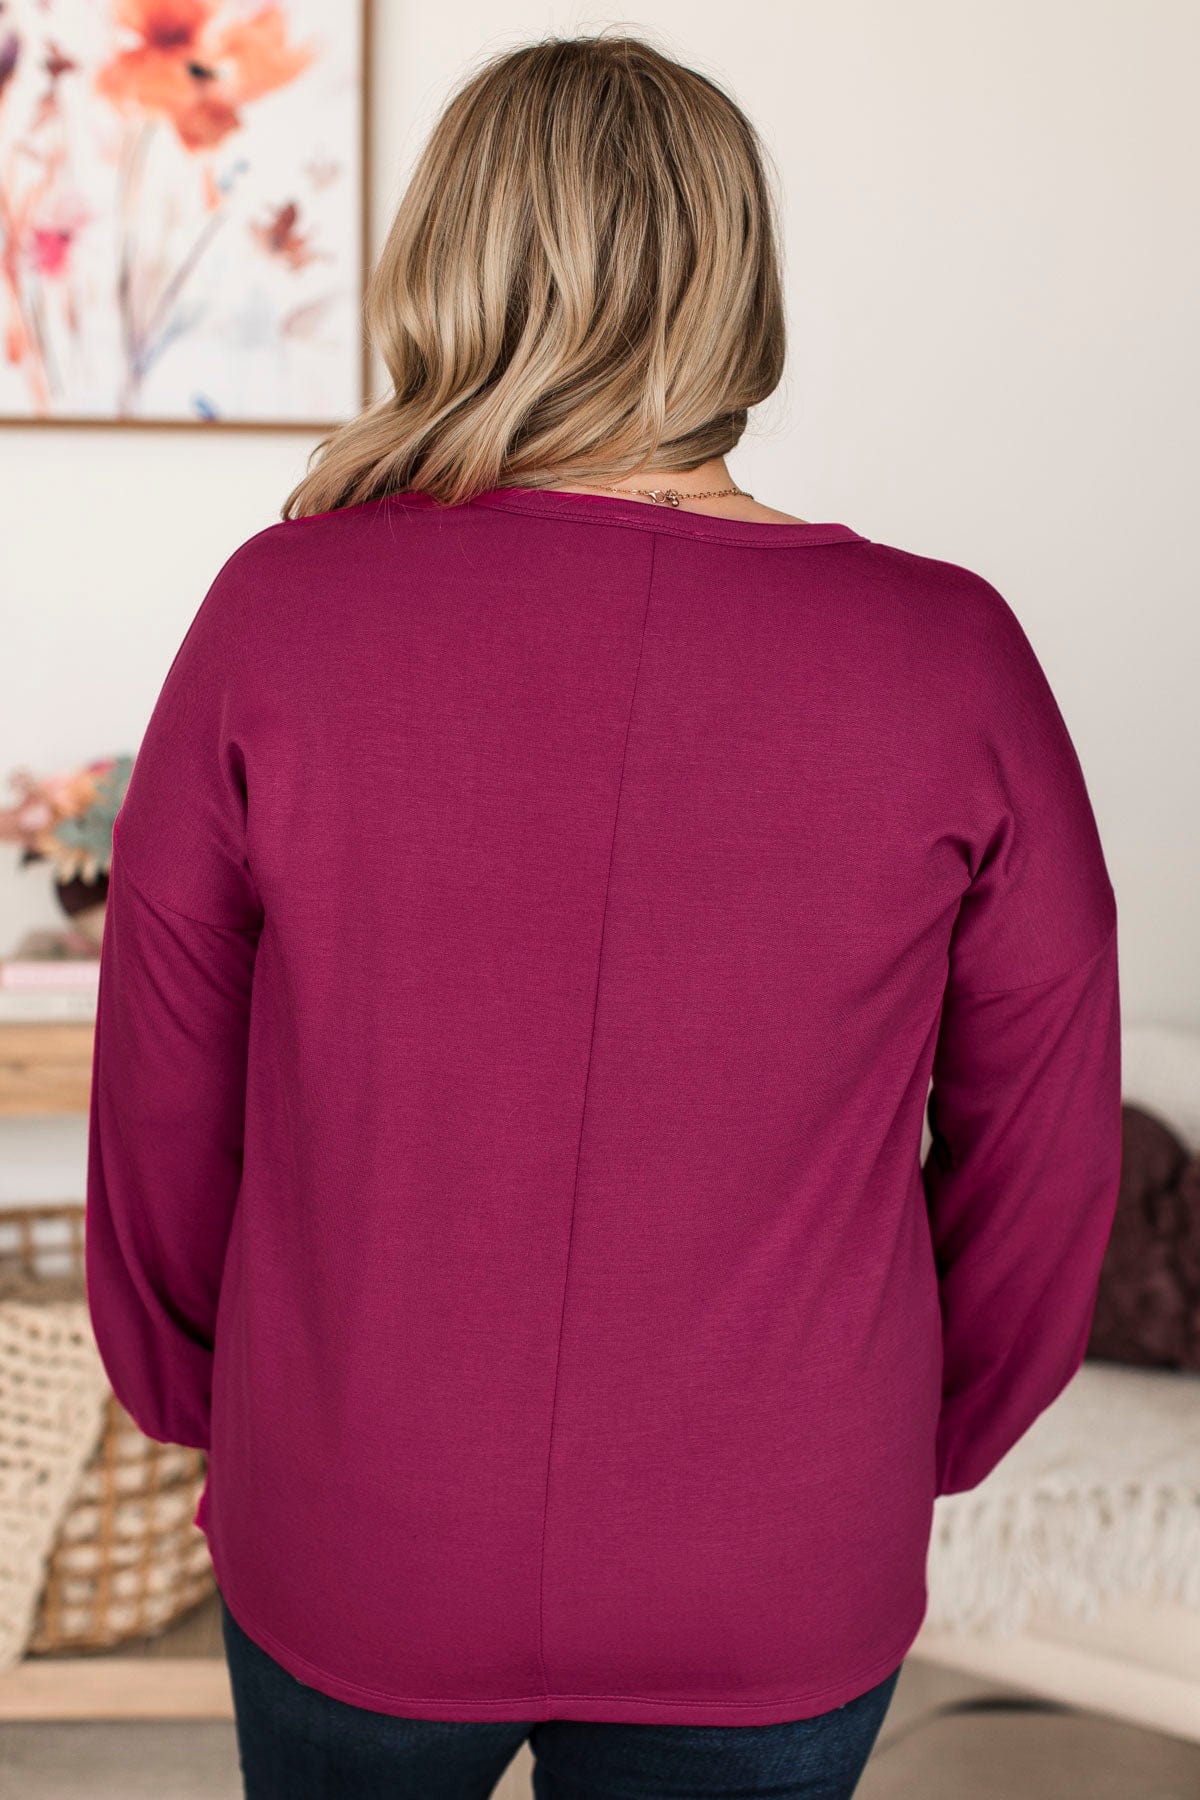 Life's Blessings Long Sleeve Top- Magenta